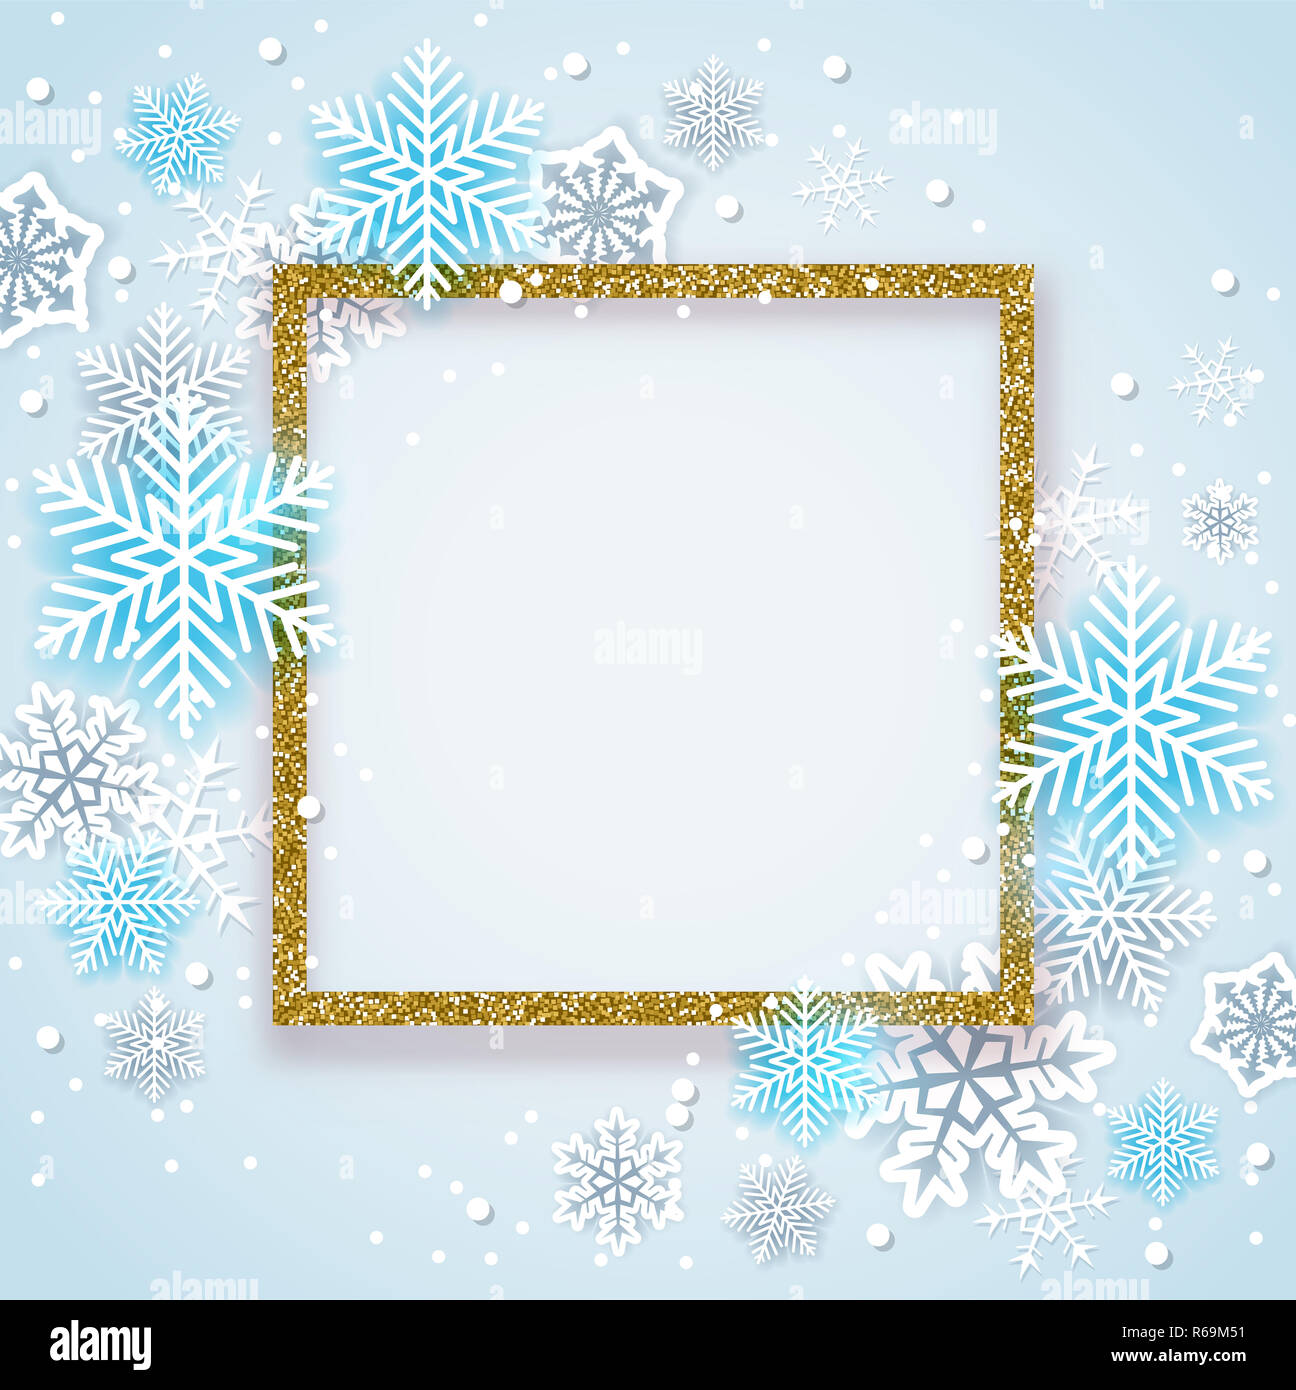 Christmas background with golden glittering frame and blue snowflakes. New year greeting card. Stock Photo